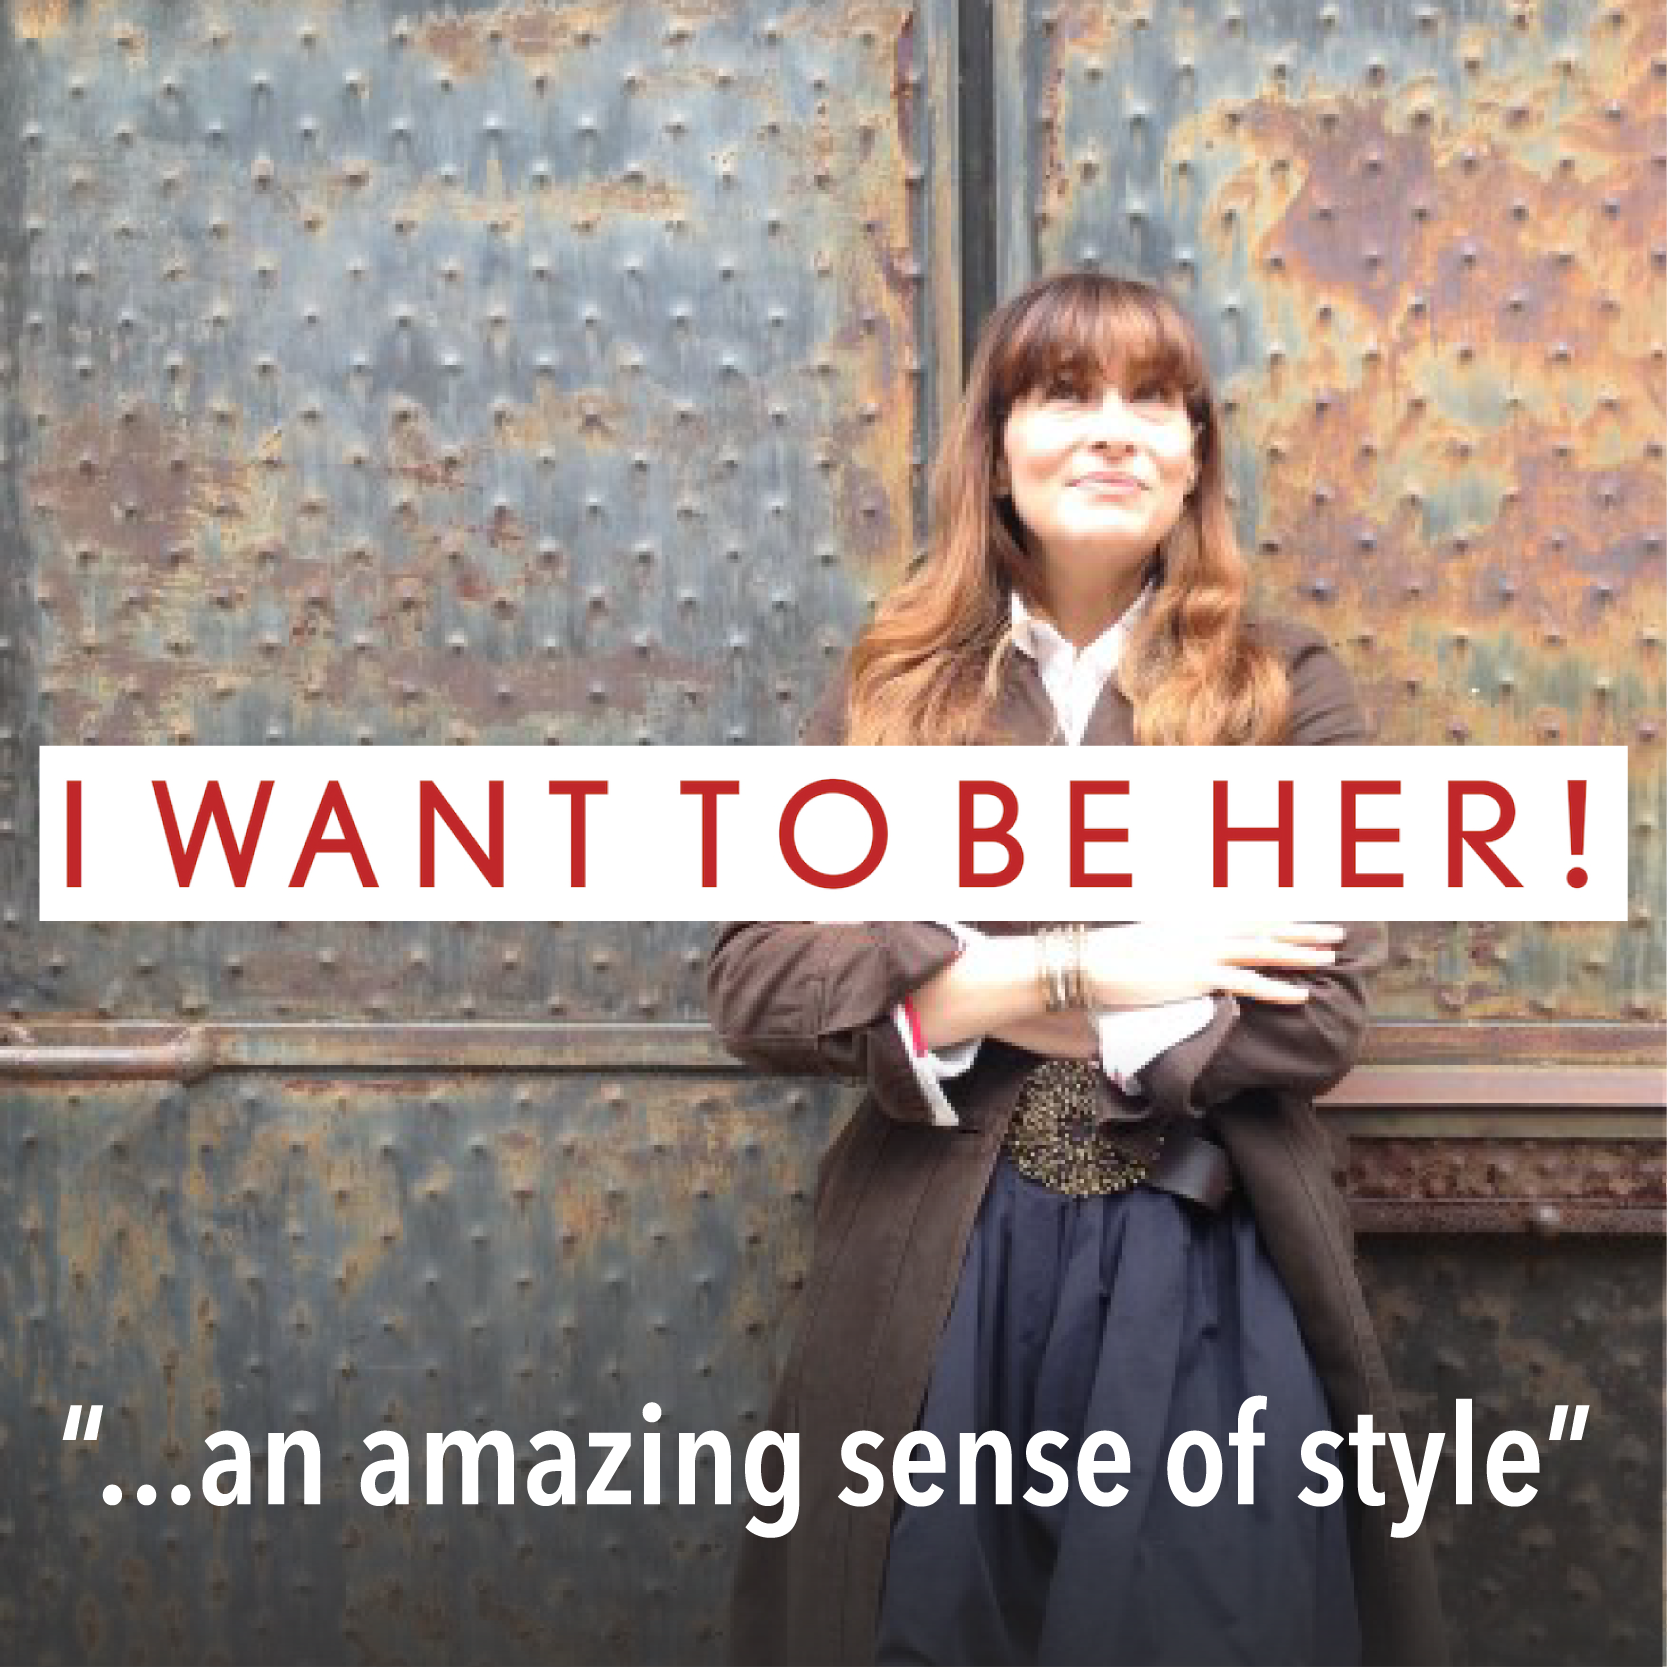 I Want To Be Her!: Top 5: Marla Aaron, Jewelry Designer